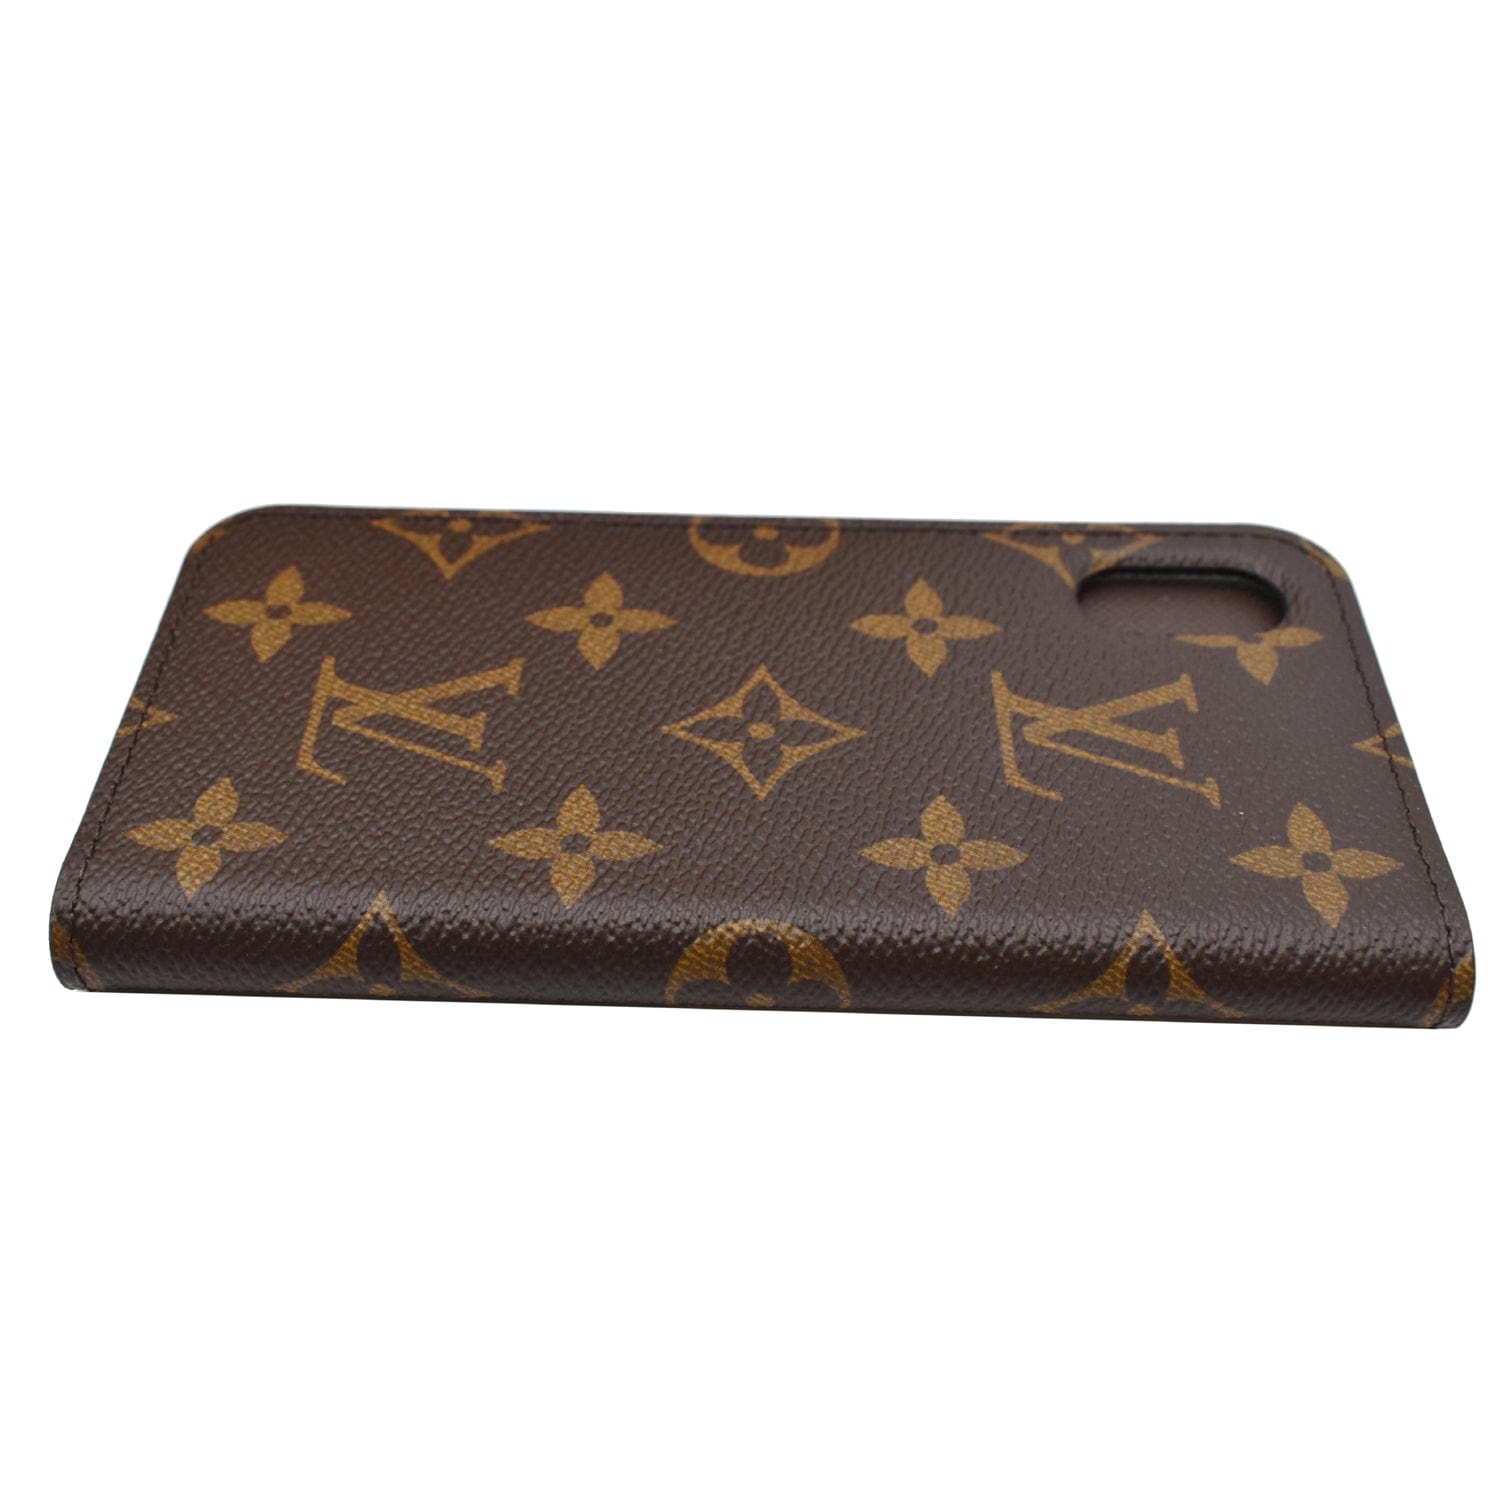 loewe iphone 15 case Louis Vuitton dior iphone 14 15 leather case